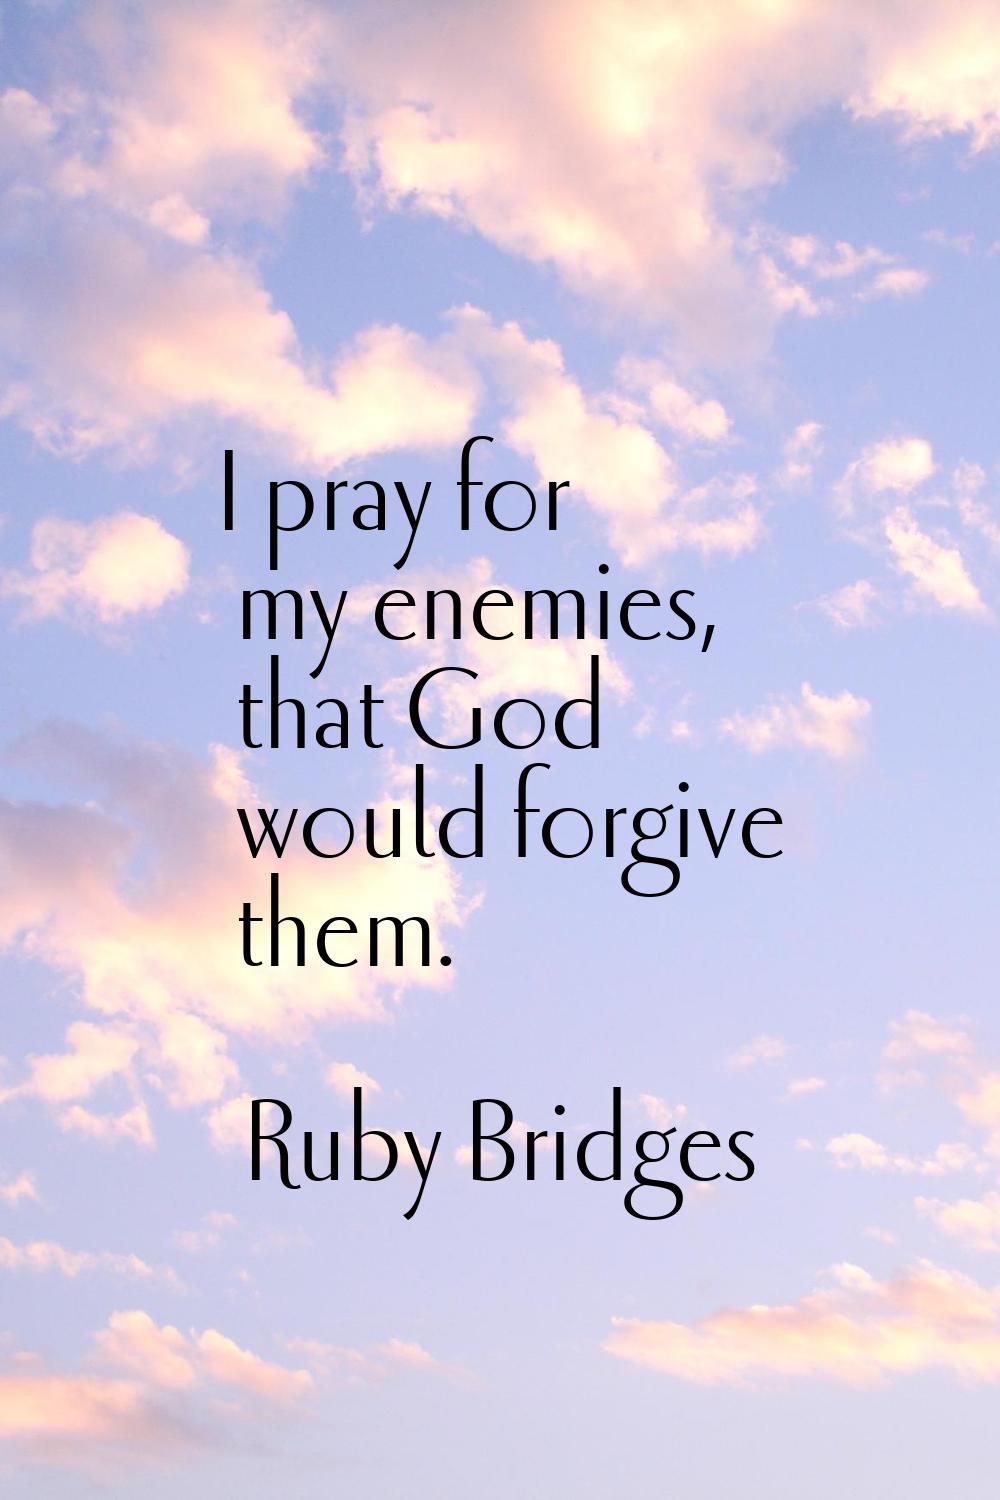 I pray for my enemies, that God would forgive them.